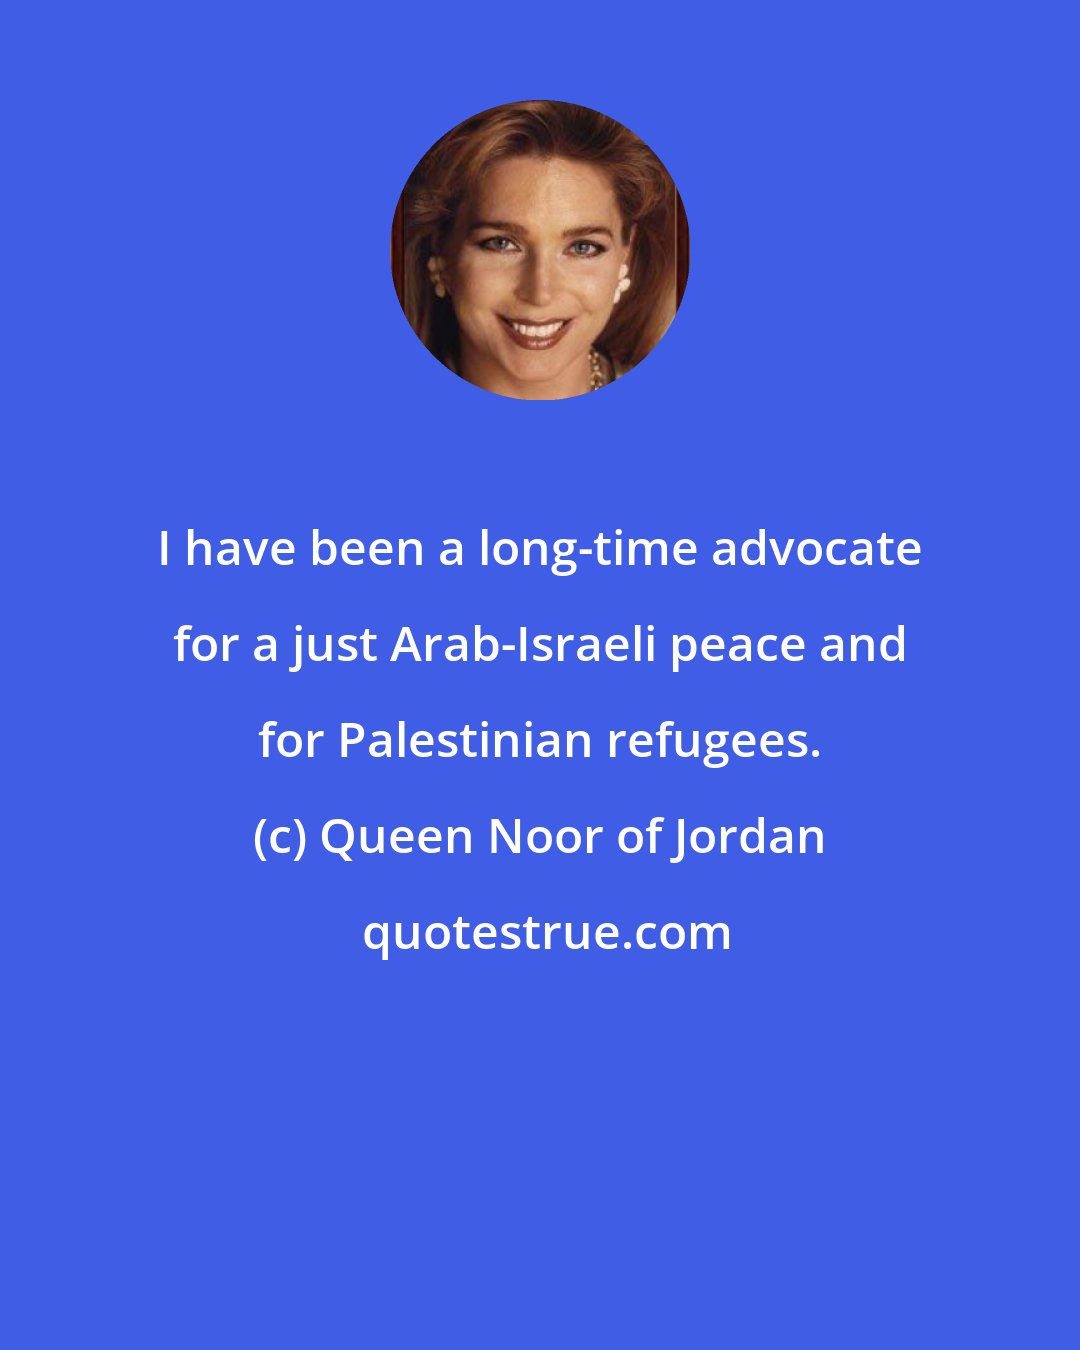 Queen Noor of Jordan: I have been a long-time advocate for a just Arab-Israeli peace and for Palestinian refugees.